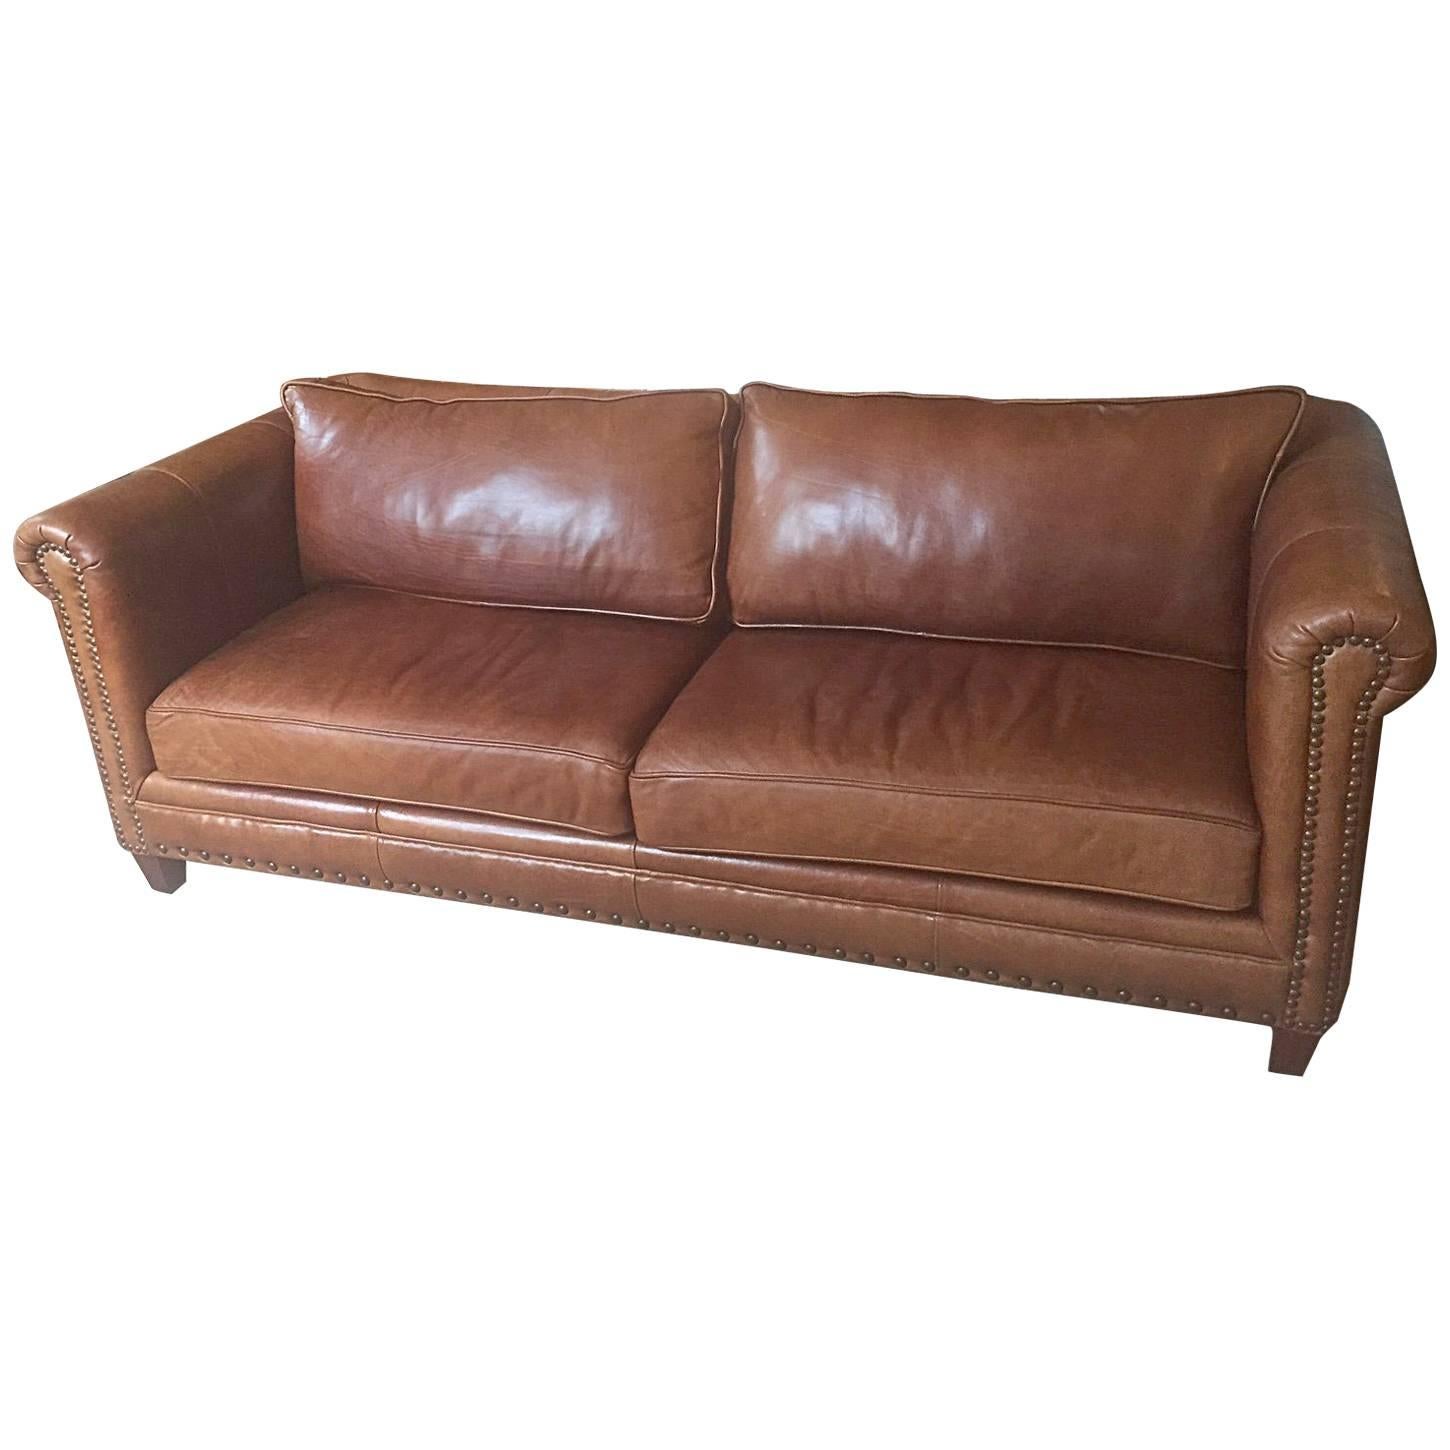 Sumptuous Soft Large Brown Leather Sofa